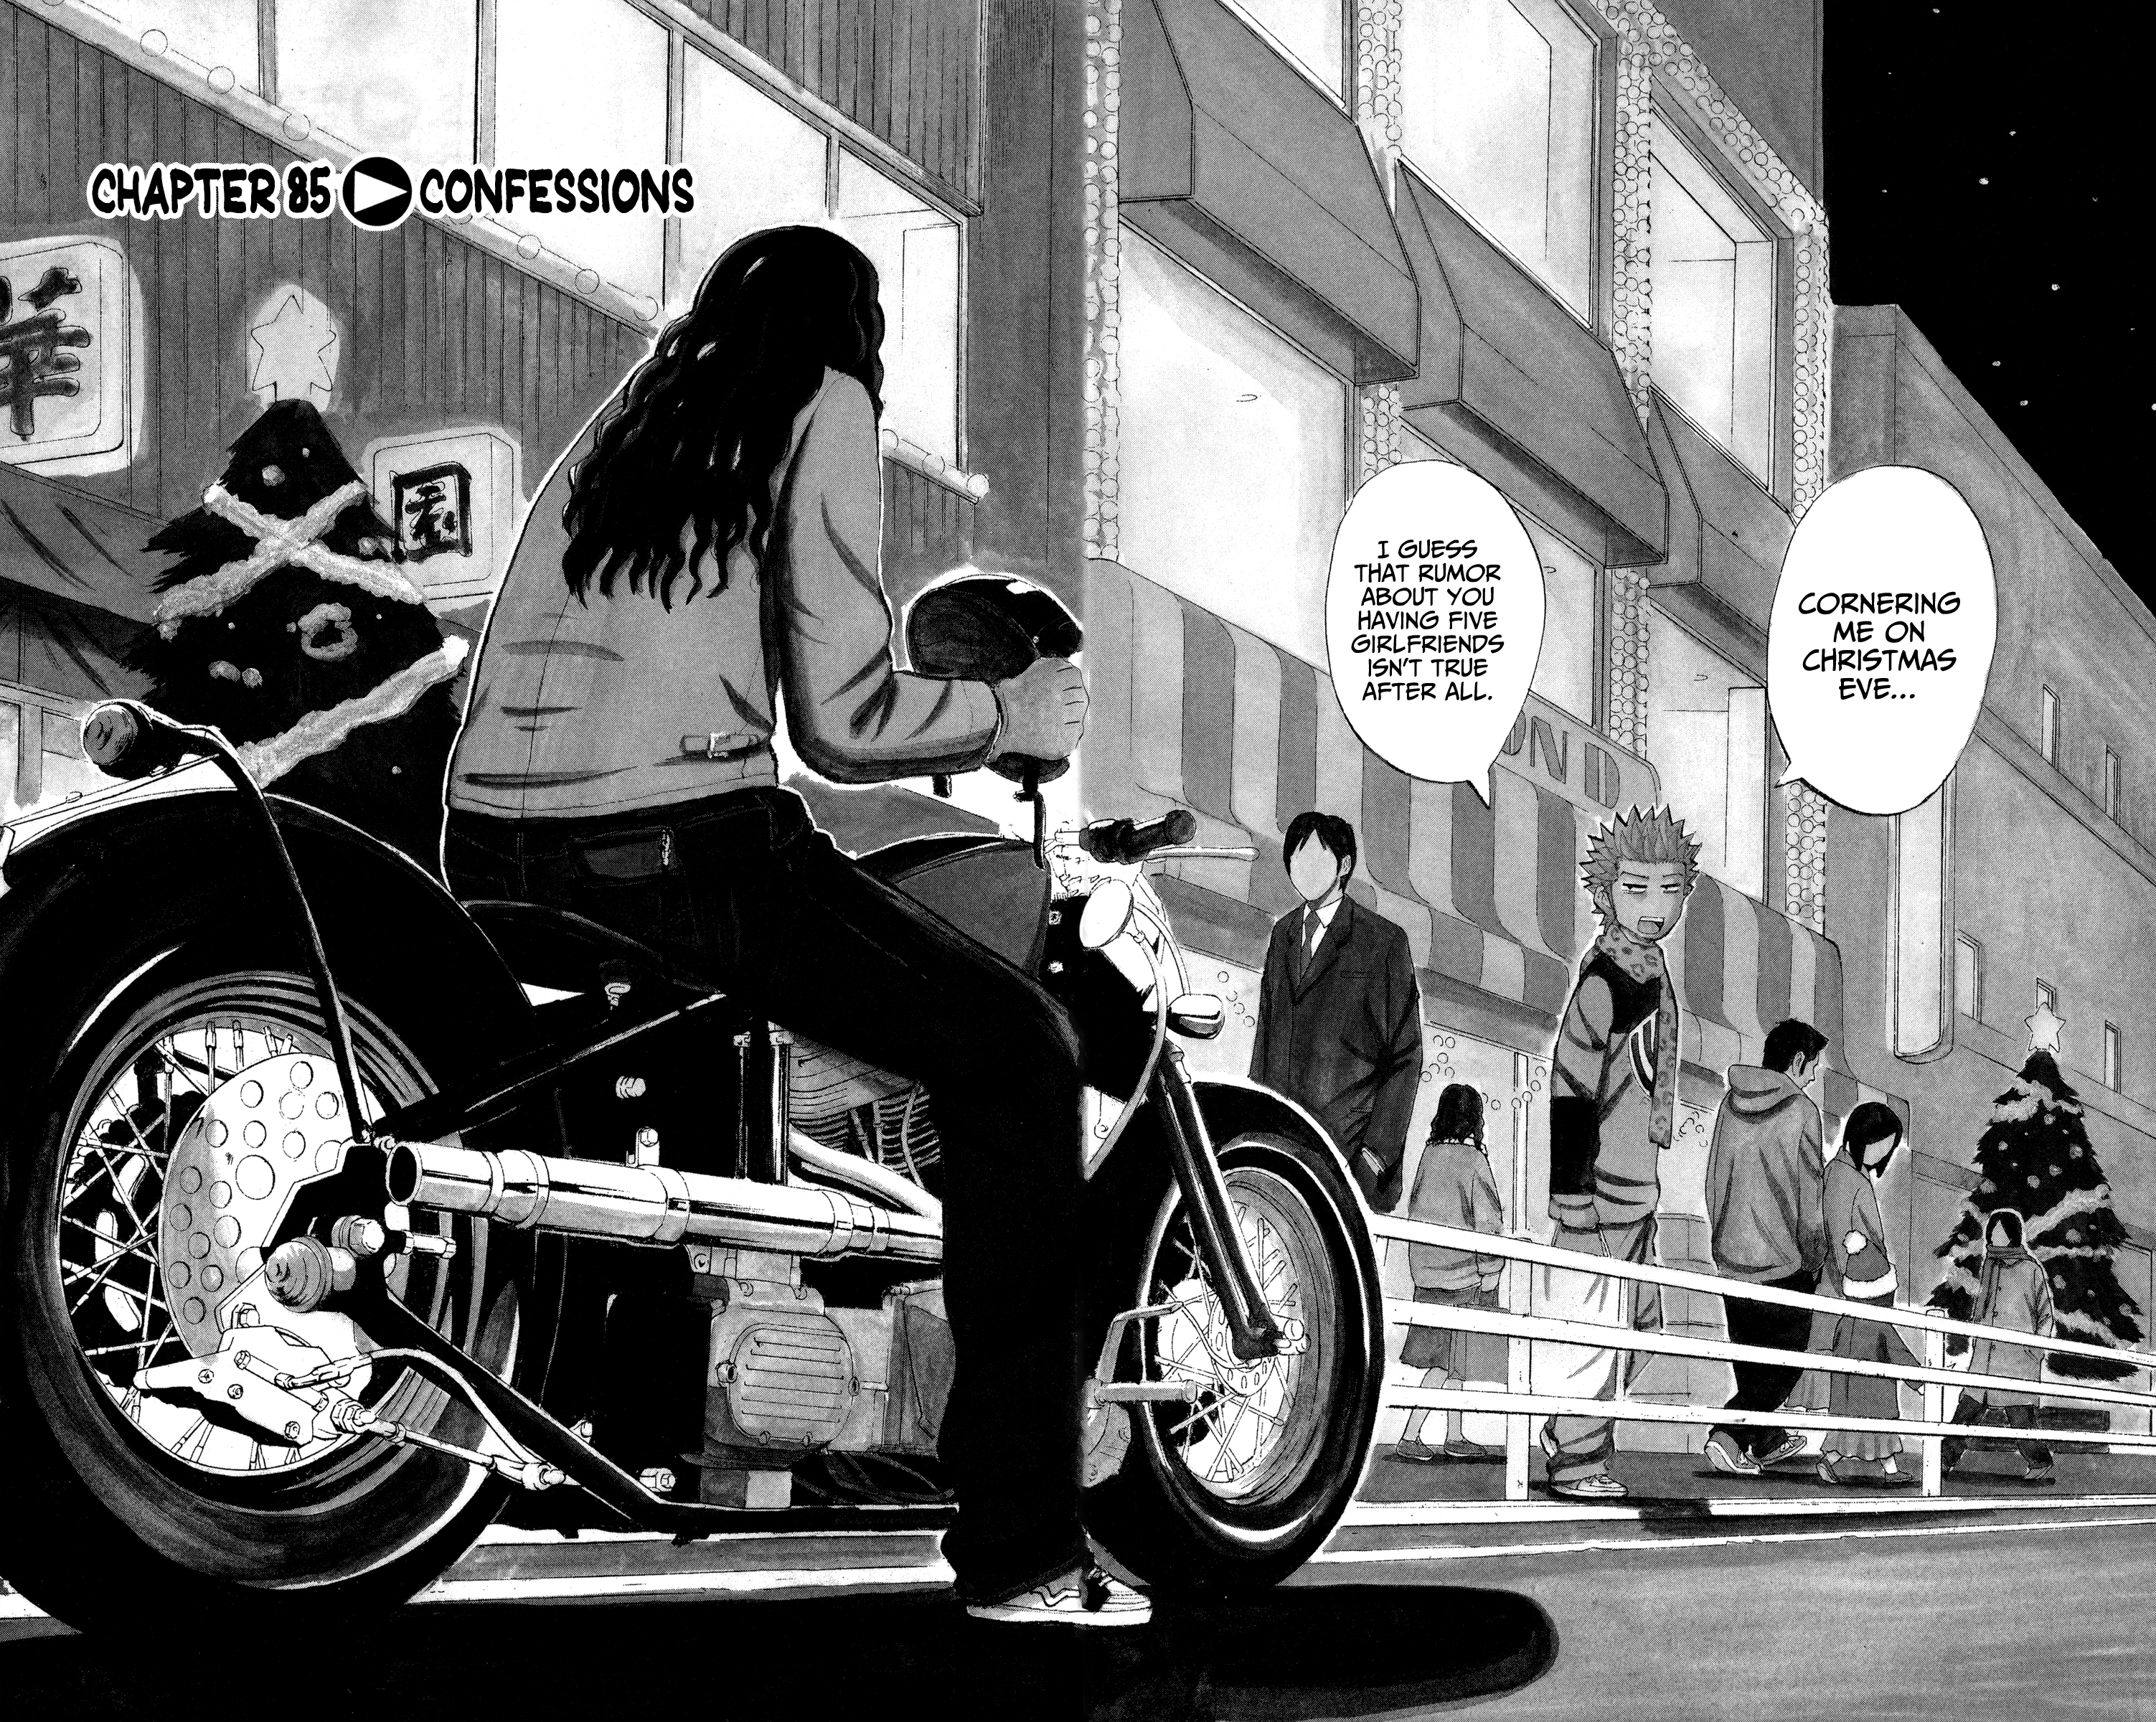 Nanba Mg5 Vol.10 Chapter 85: Confessions - Picture 2